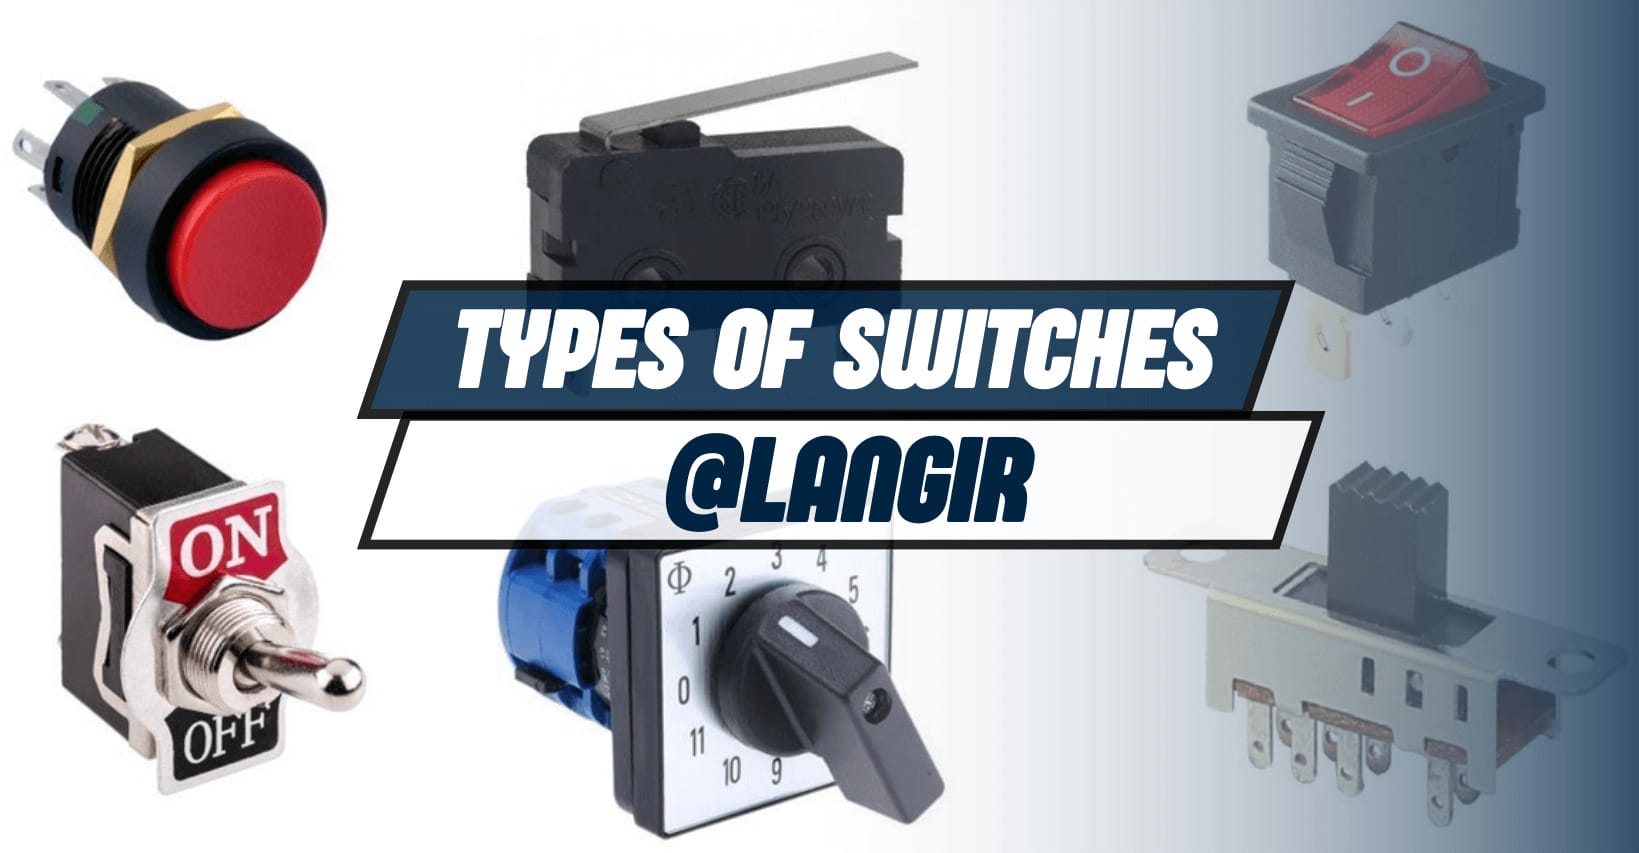 Types of Switches : Mechanical vs. Electronic Switches - Langir Electric